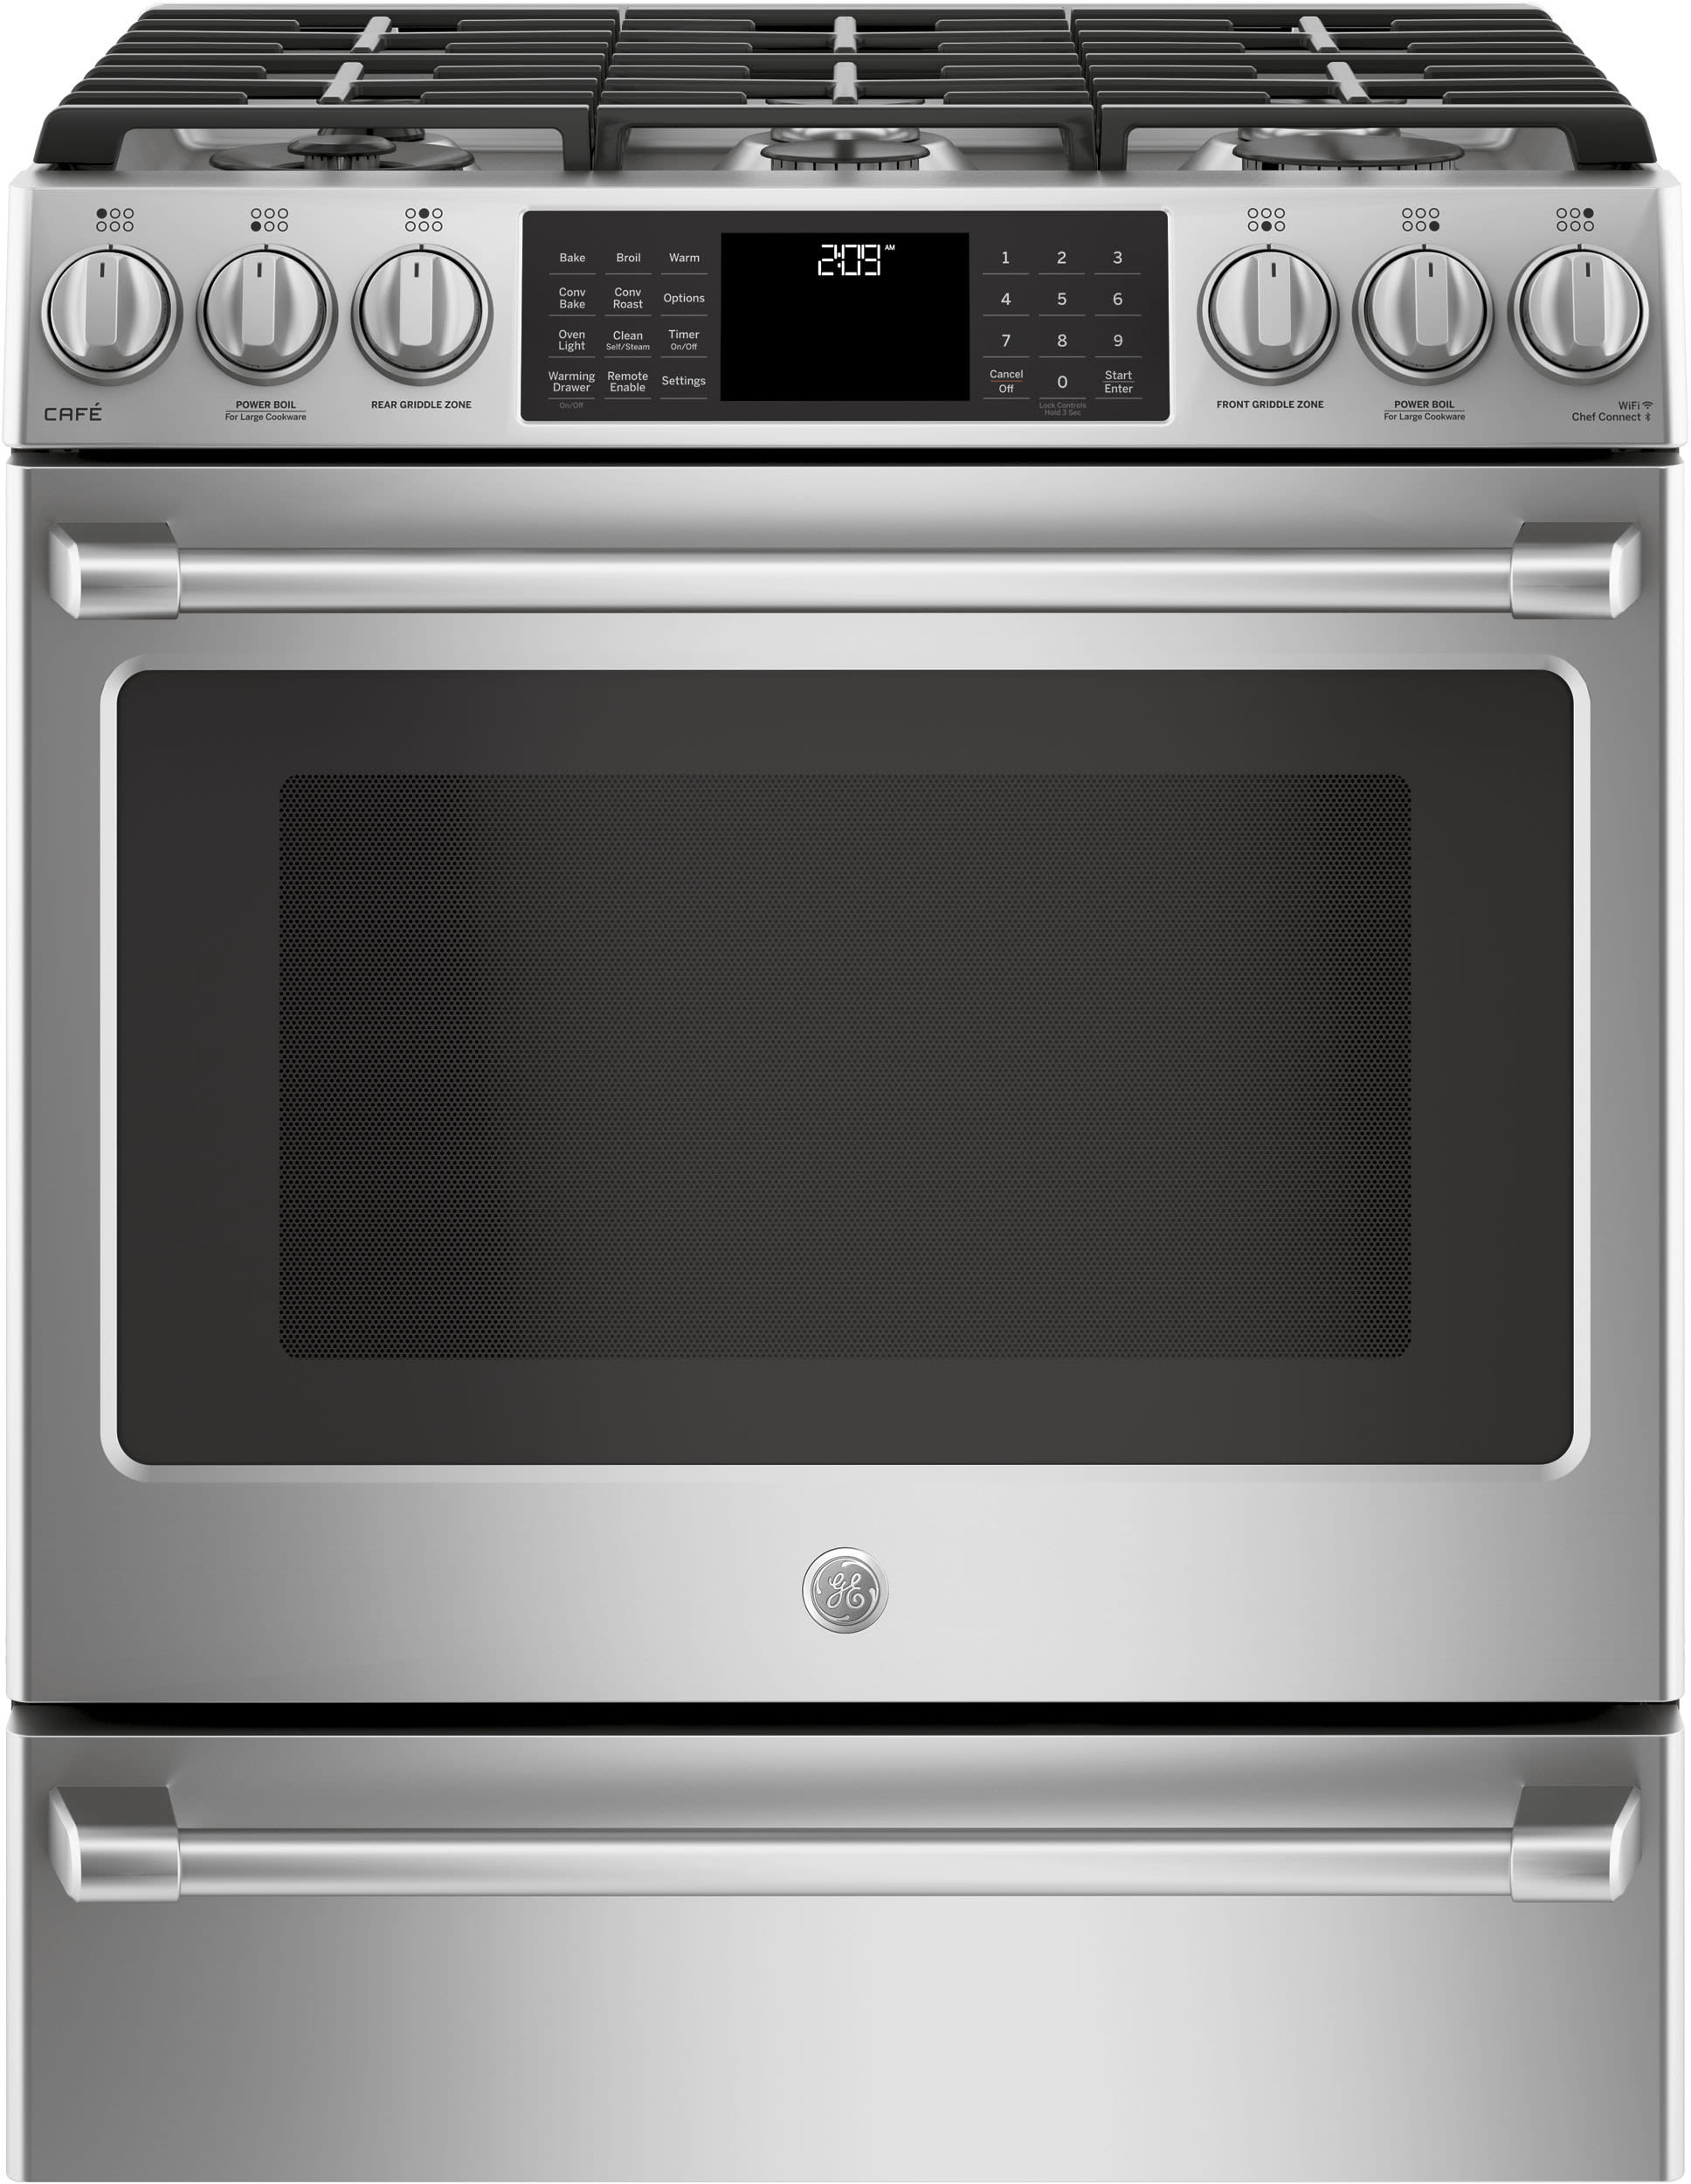 GE Parts WB49XCR05C Complete Cooktop Kit for CafÃ© Gas Ranges - Great for the Holidays